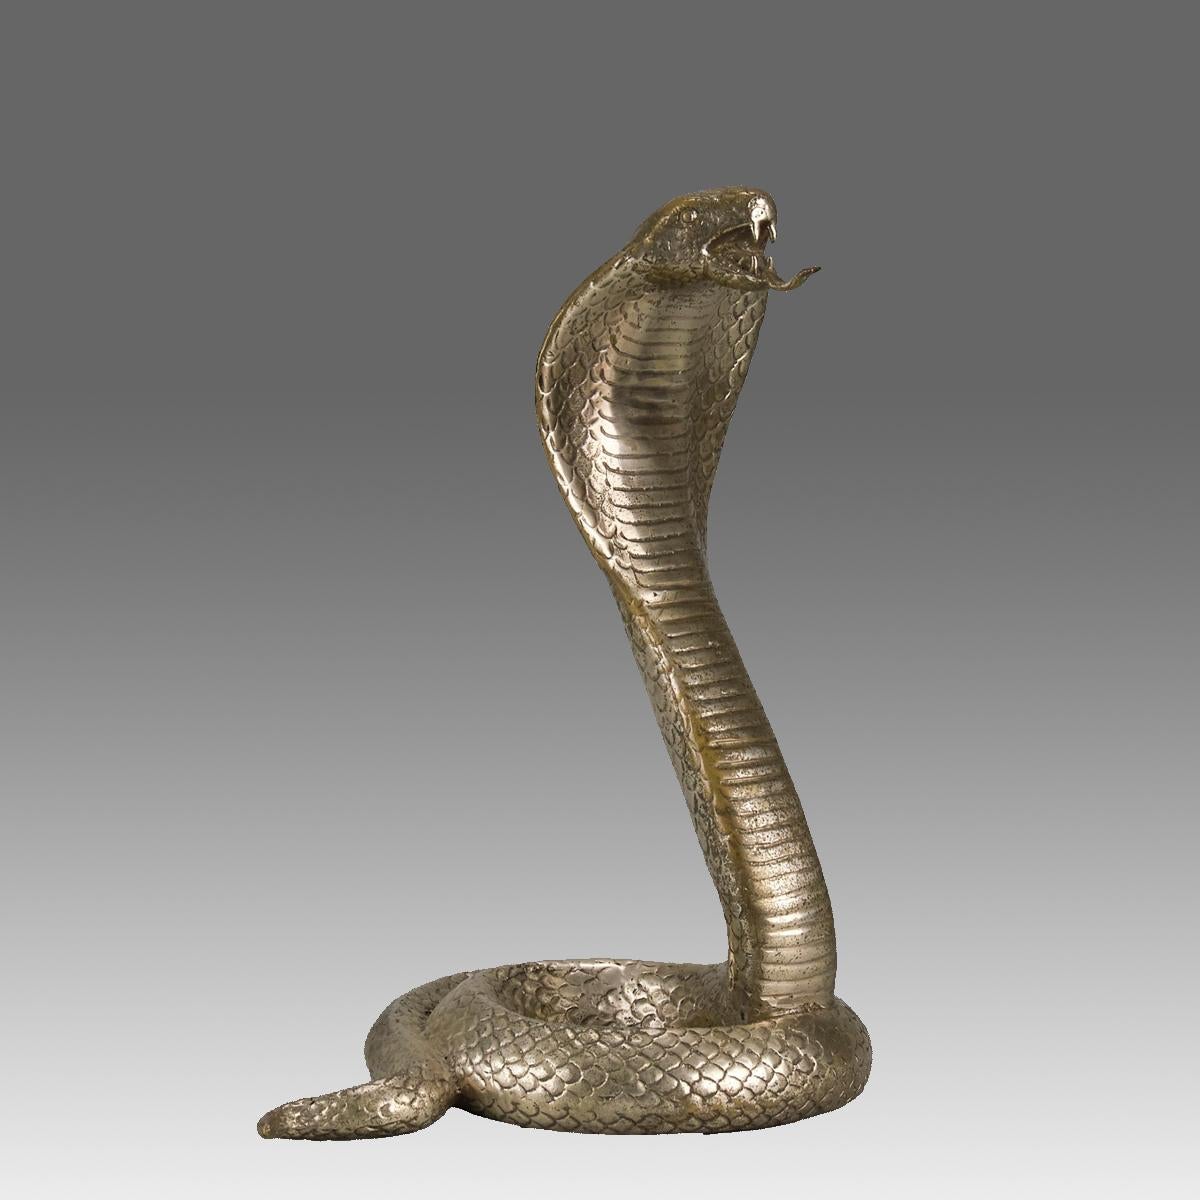 A very fine early 20th Century silvered bronze study of a rearing cobra with its body coiled and head raised, exhibting excellent hand finished surface detail, unsigned

ADDITIONAL INFORMATION
Height:                                      32 cm      